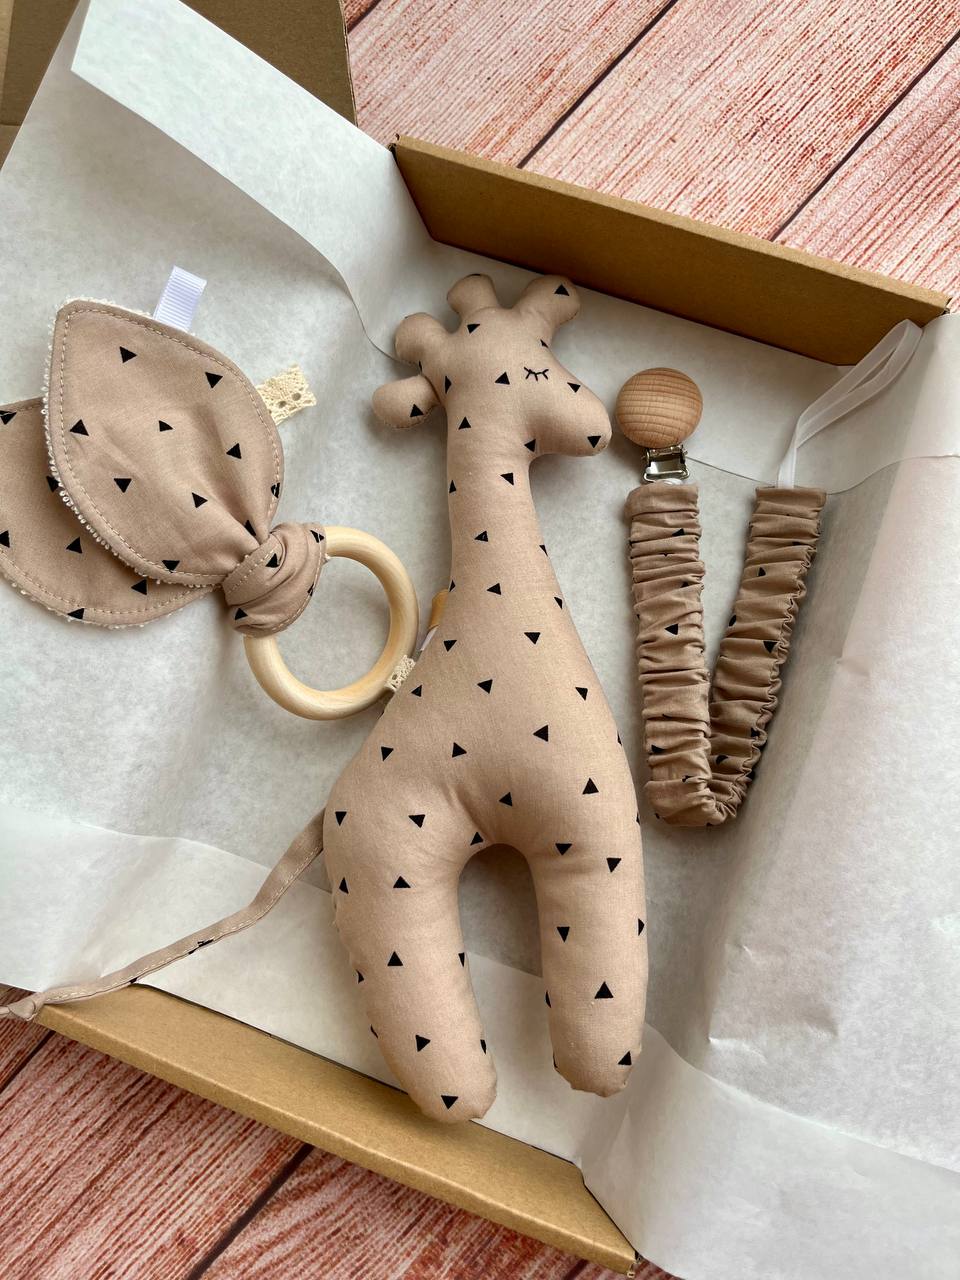 Soft Giraffe toy, Bunny ear teether and pacifier holder - perfect baby gift set, Triangles on beige